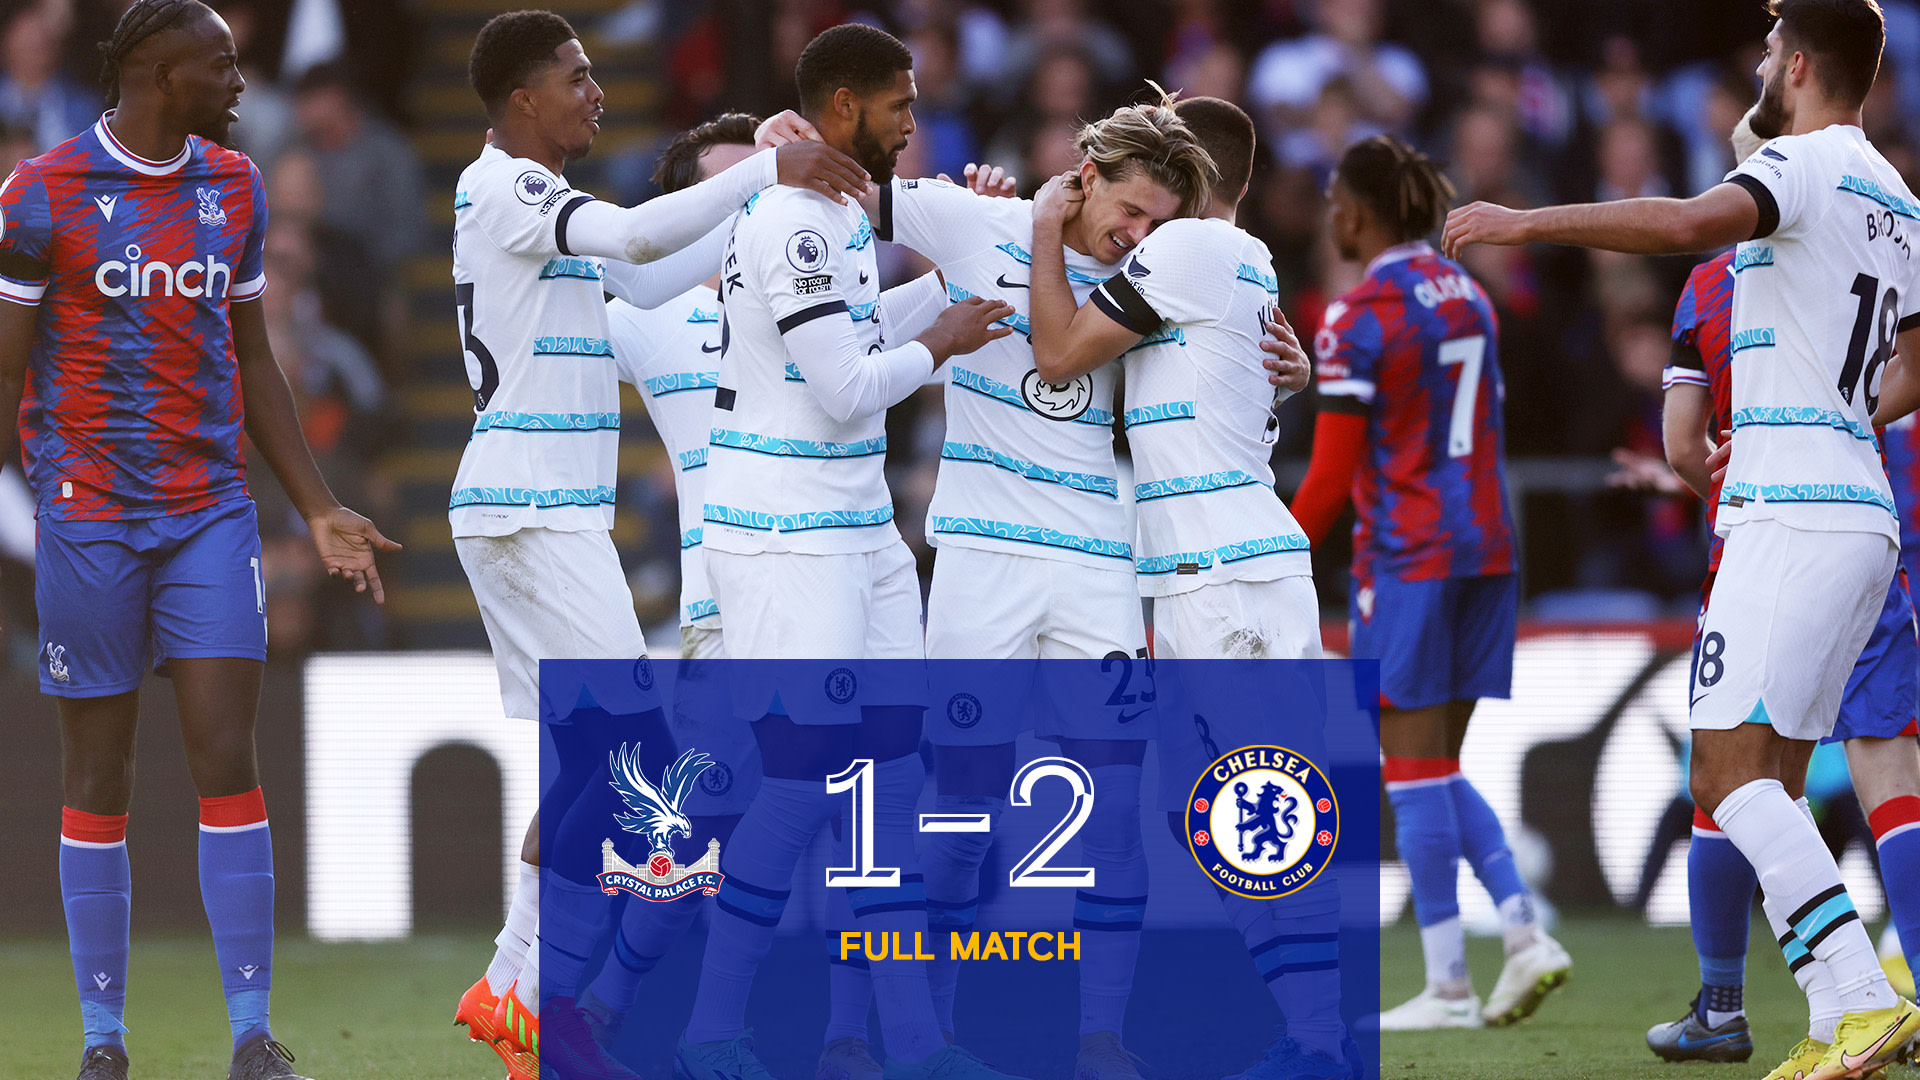 Crystal Palace 1-2 Chelsea Premier League Full Match Video Official Site Chelsea Football Club